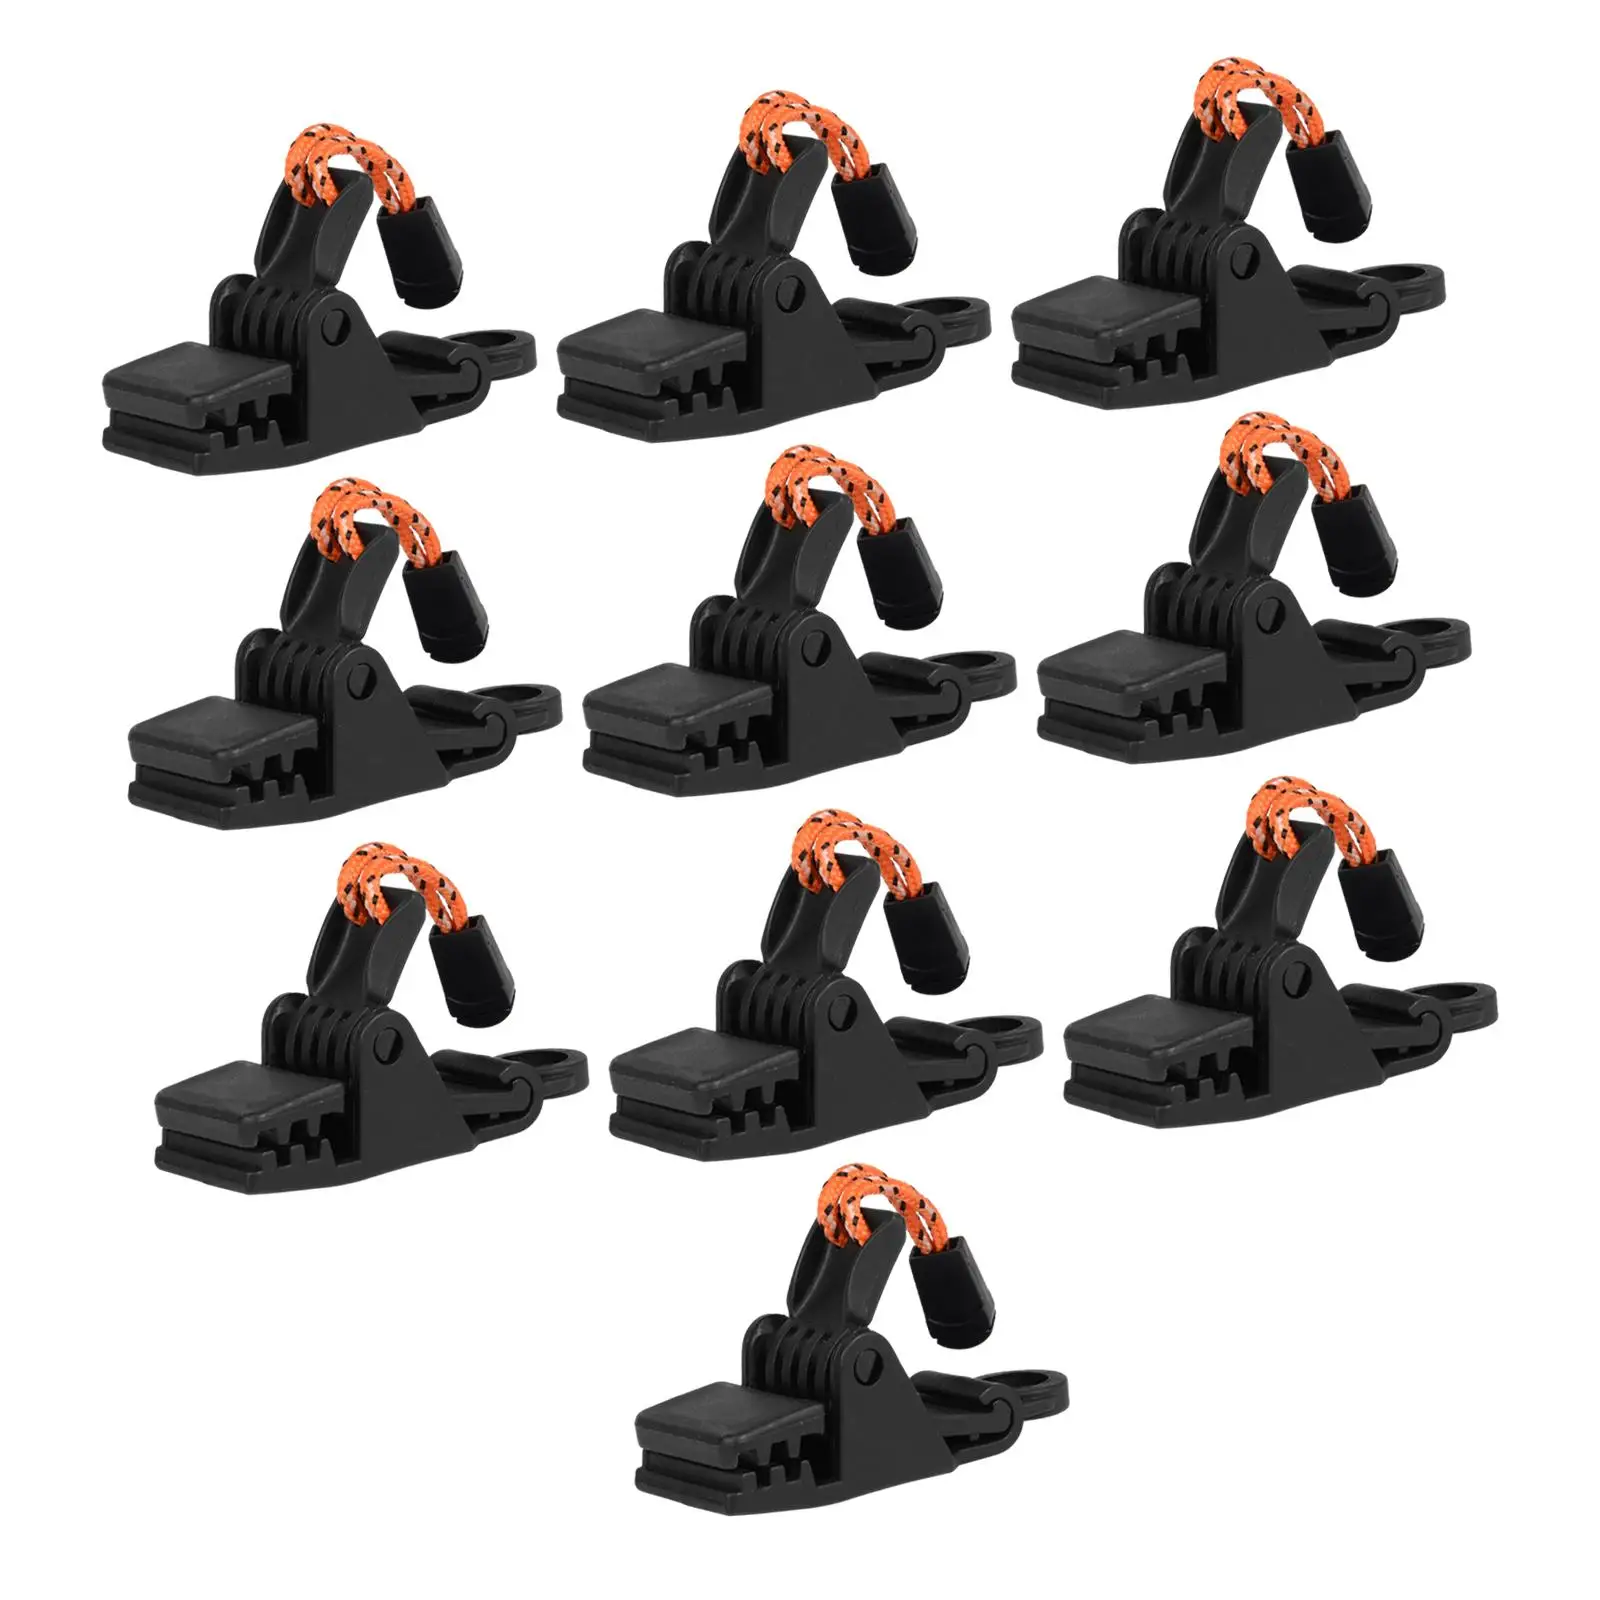 10 Pieces Tarp Clips Heavy Duty Portable Durable Awning Clamps for Swimming Pool Covers Car Covers Boat Cover Hiking Shade Cloth